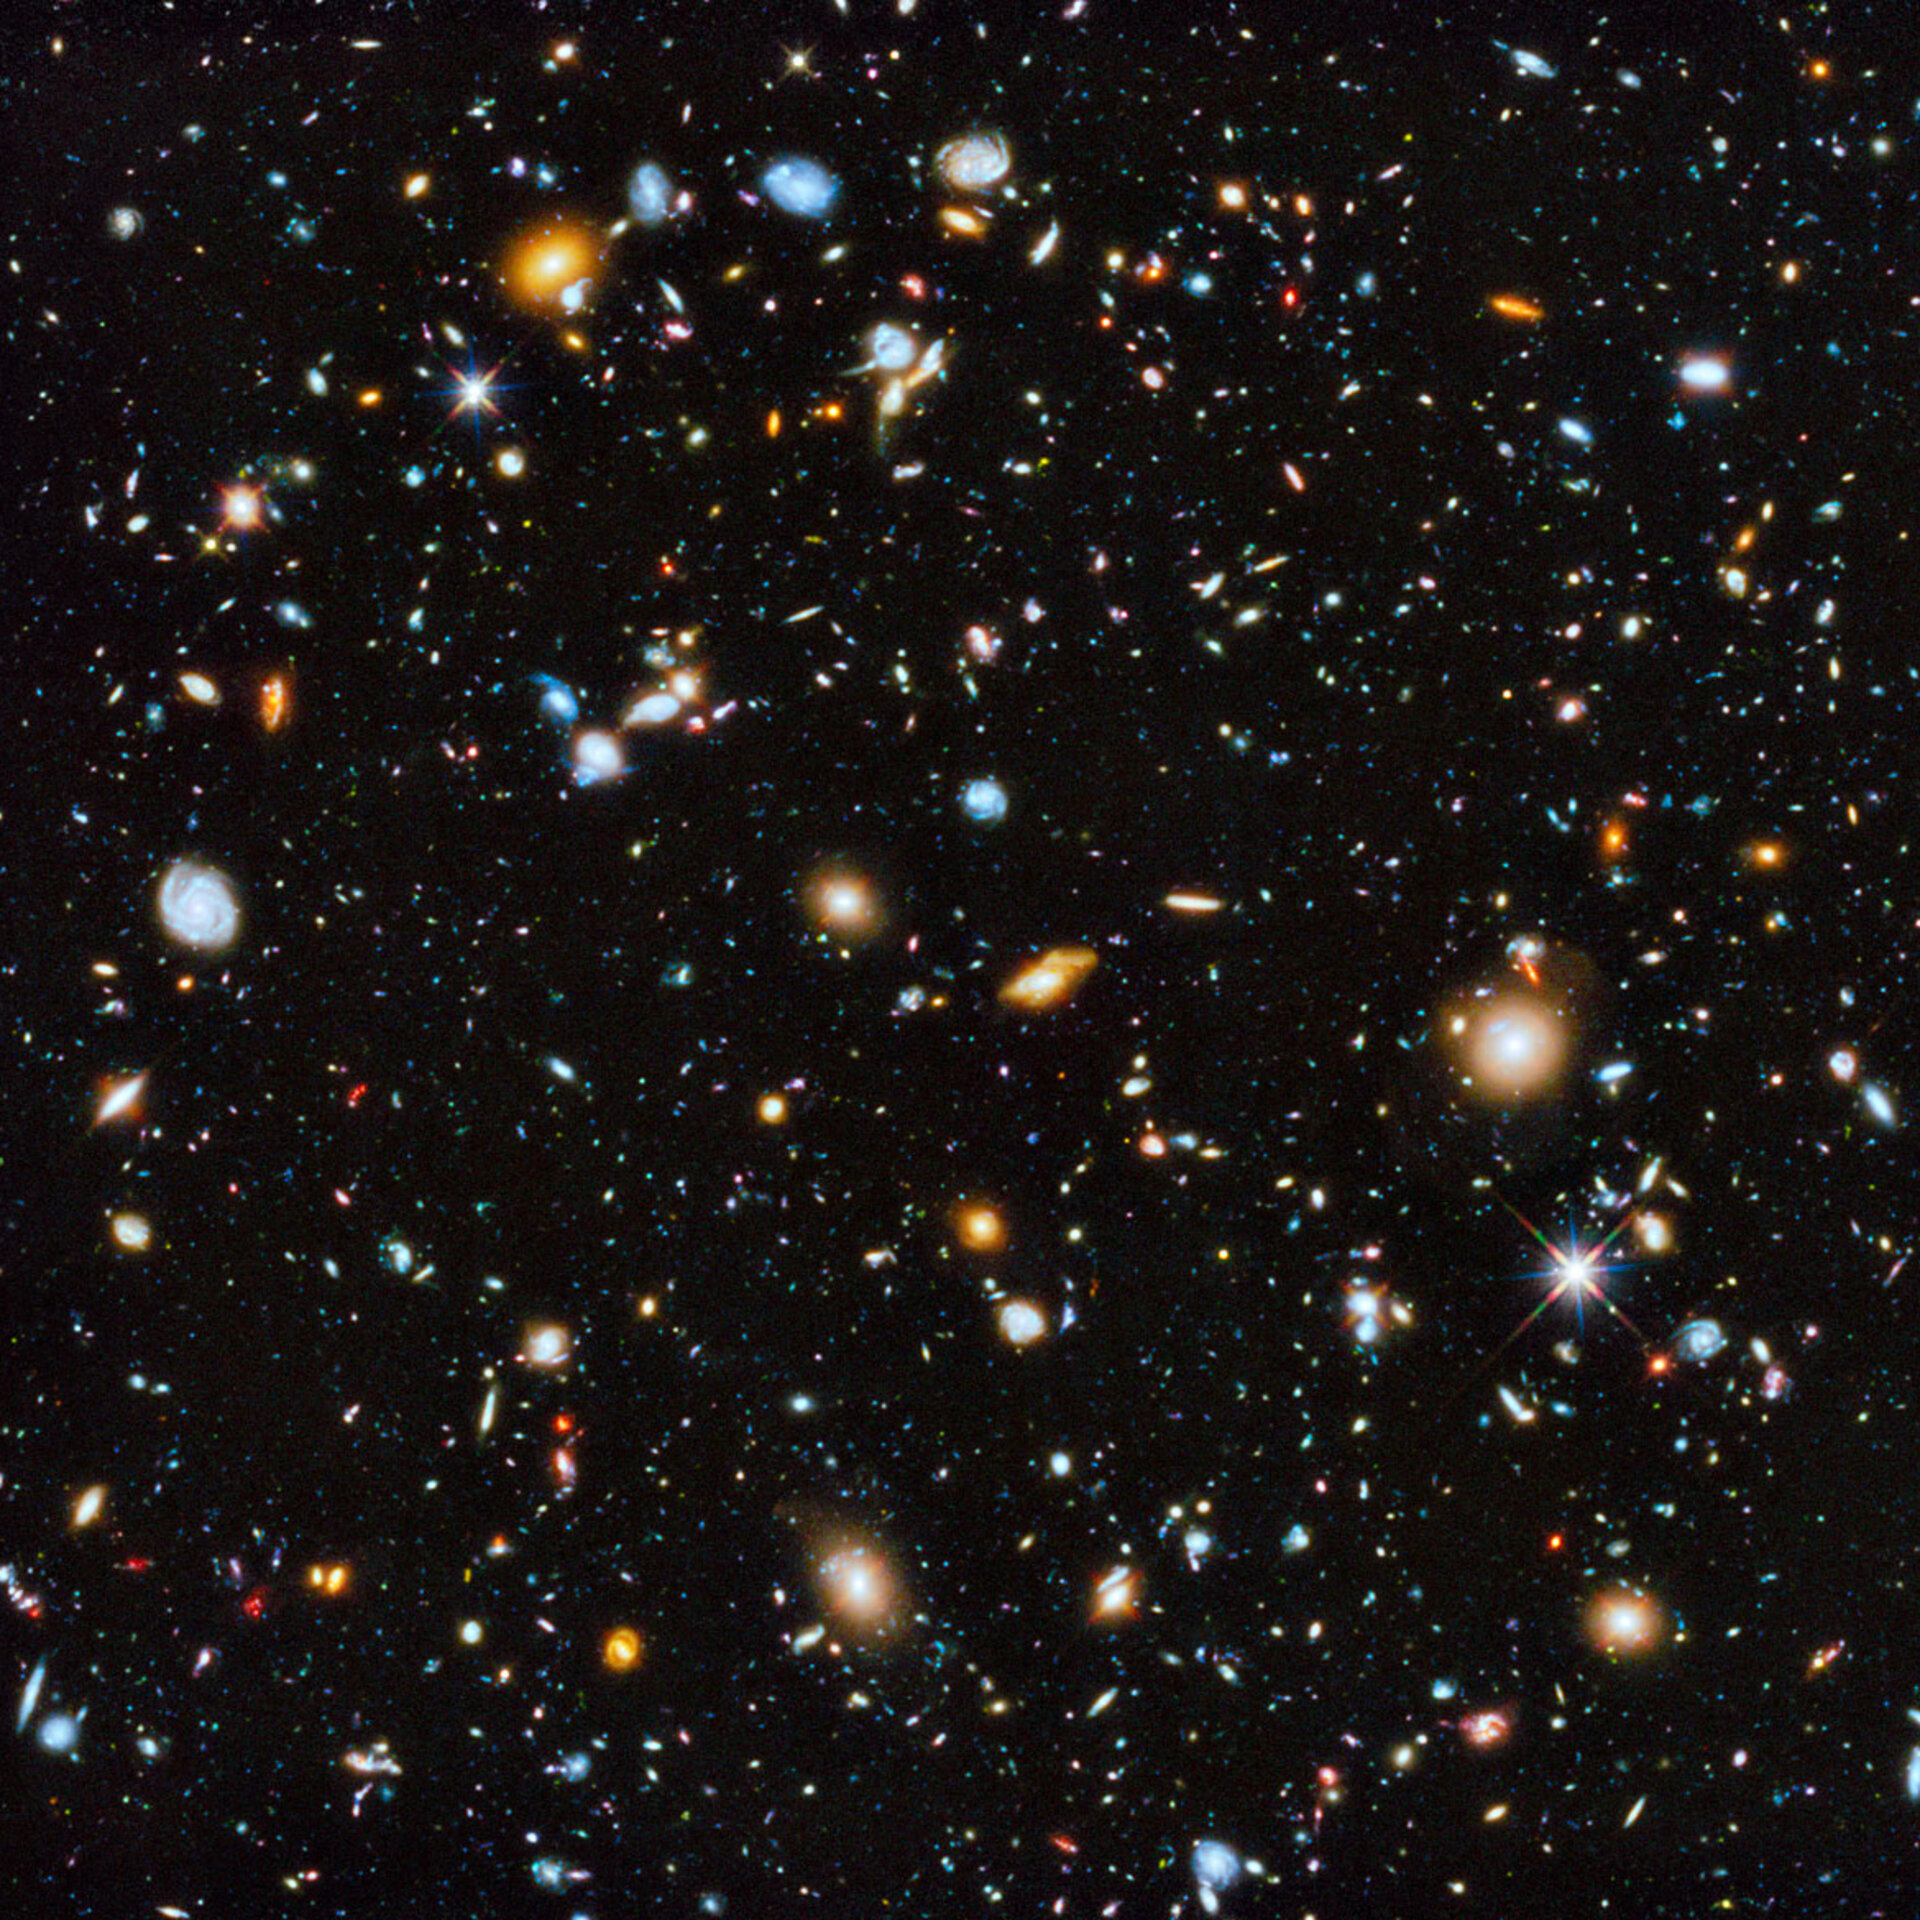 Ultraviolet coverage of the Hubble Ultra Deep Field